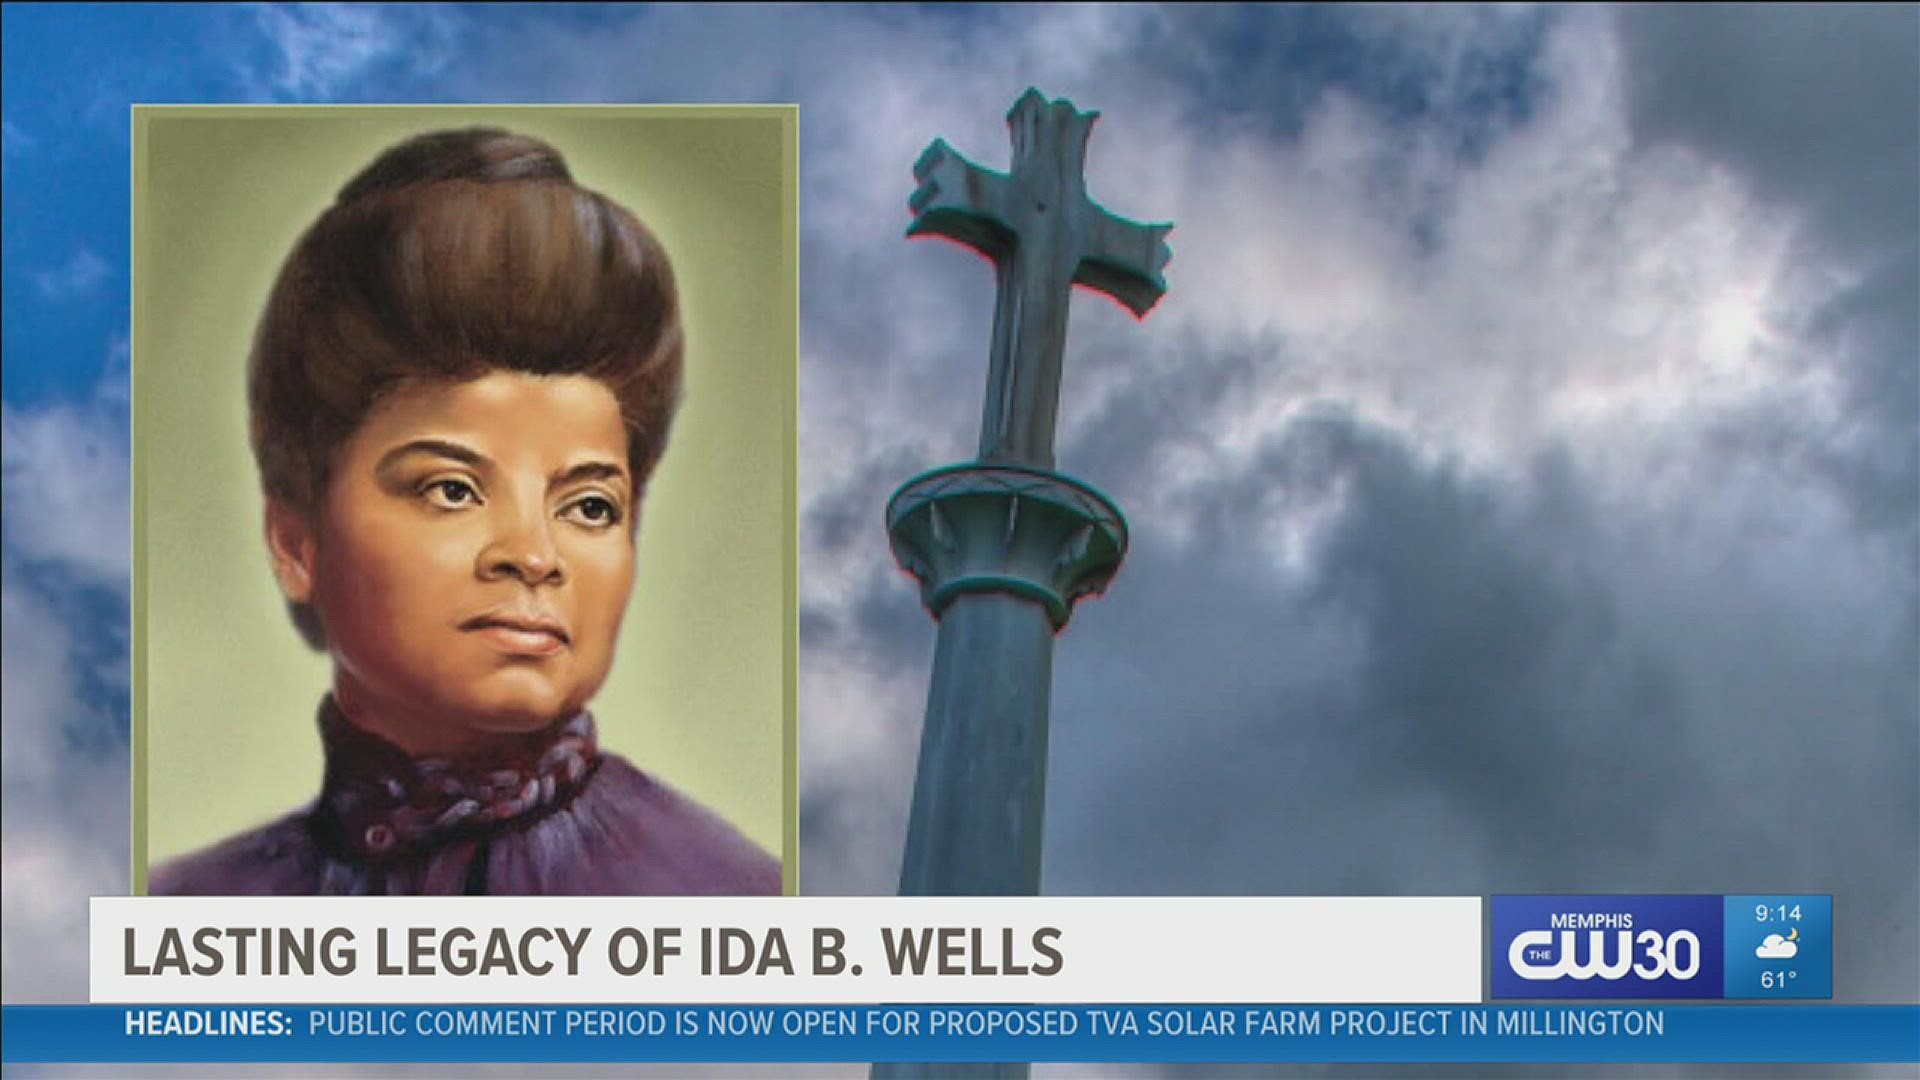 Wells' great-grandson said she would be grateful for the recognition but would say there's still work to be done.